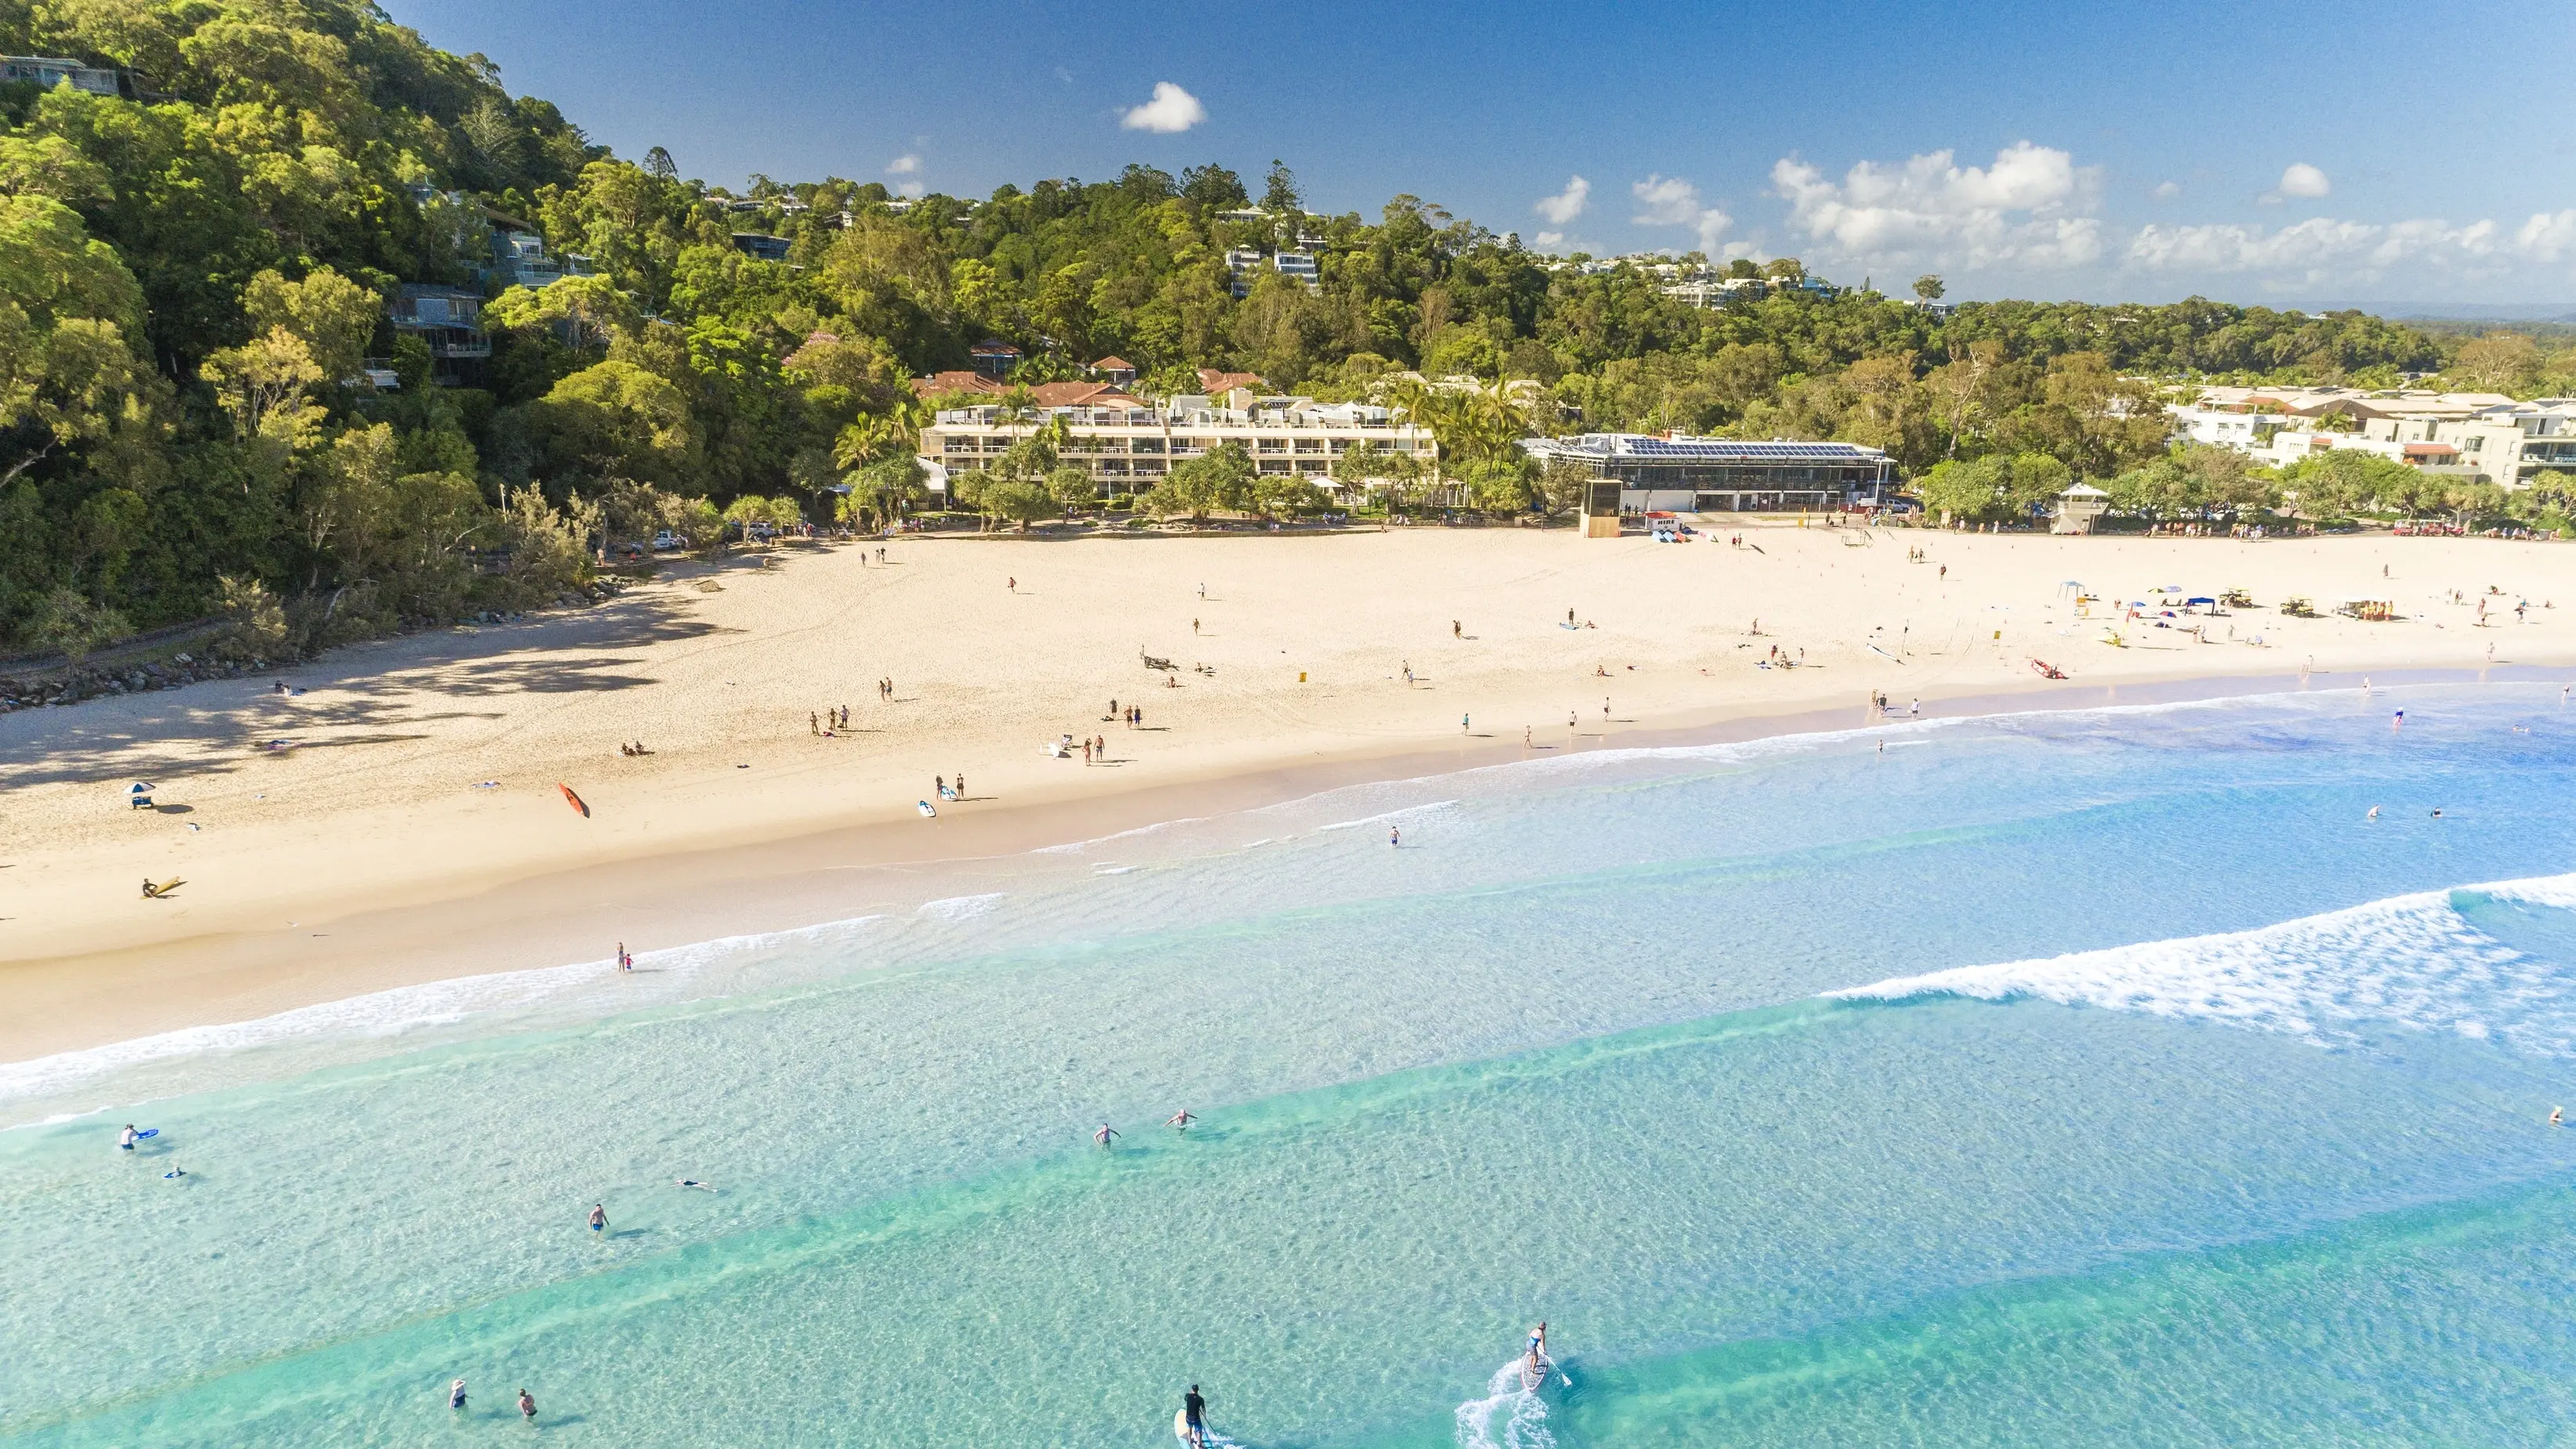 Aerial shot of wide beach with bright blue water, peach sand and fringed with trees and a beach resort building. Image credit: Tourism and Events Queensland